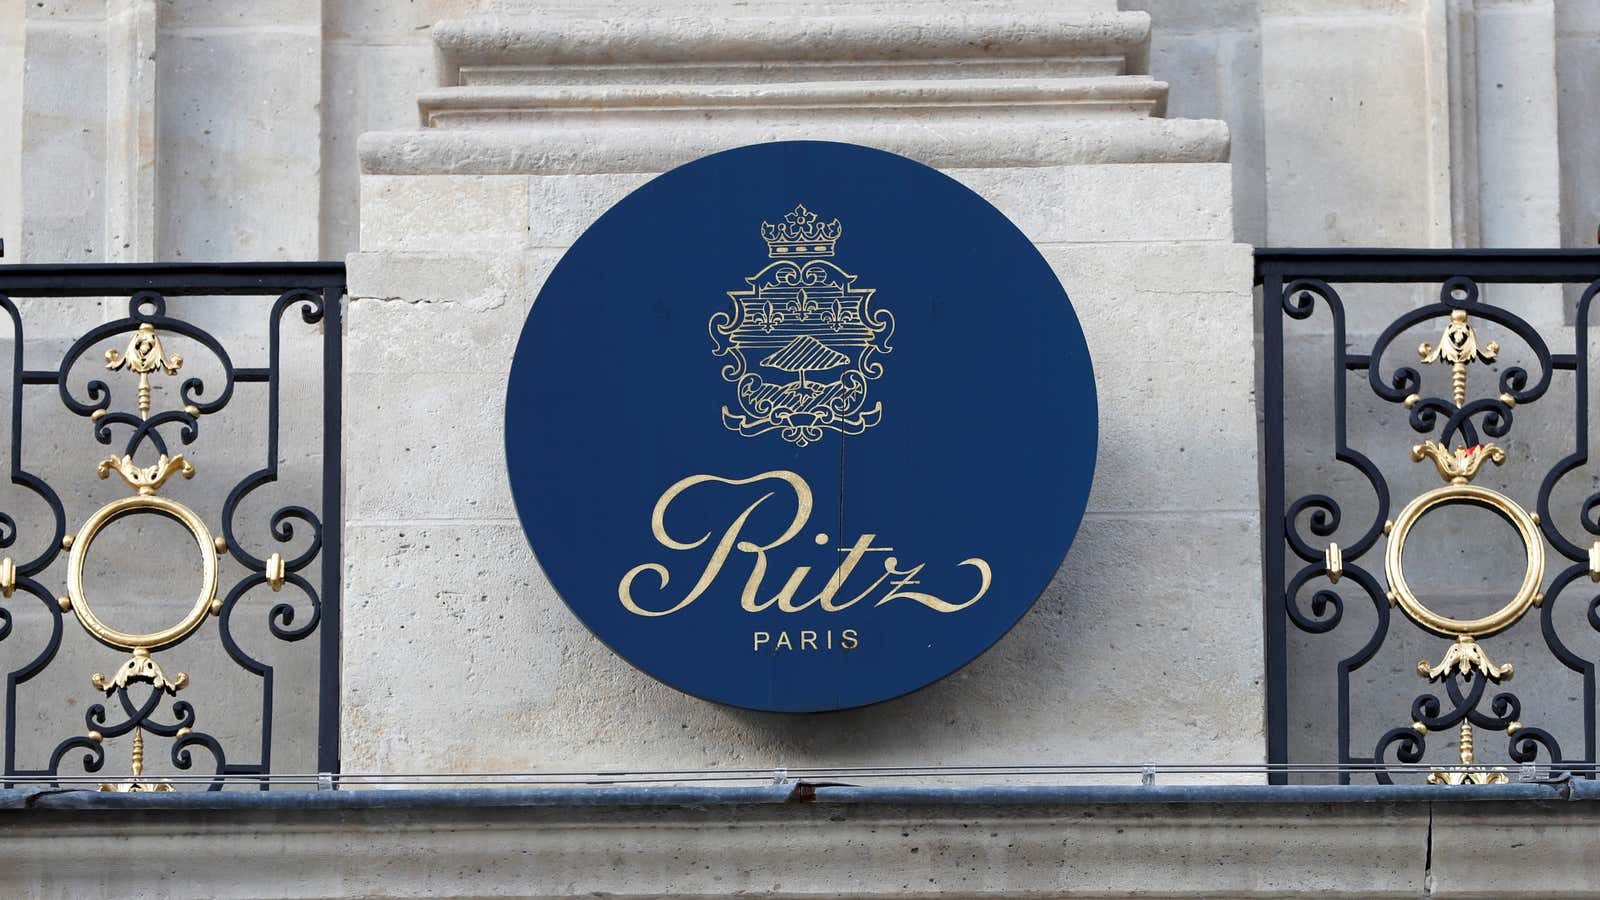 Paris Ritz auction offers bits of history, luxury and glamour